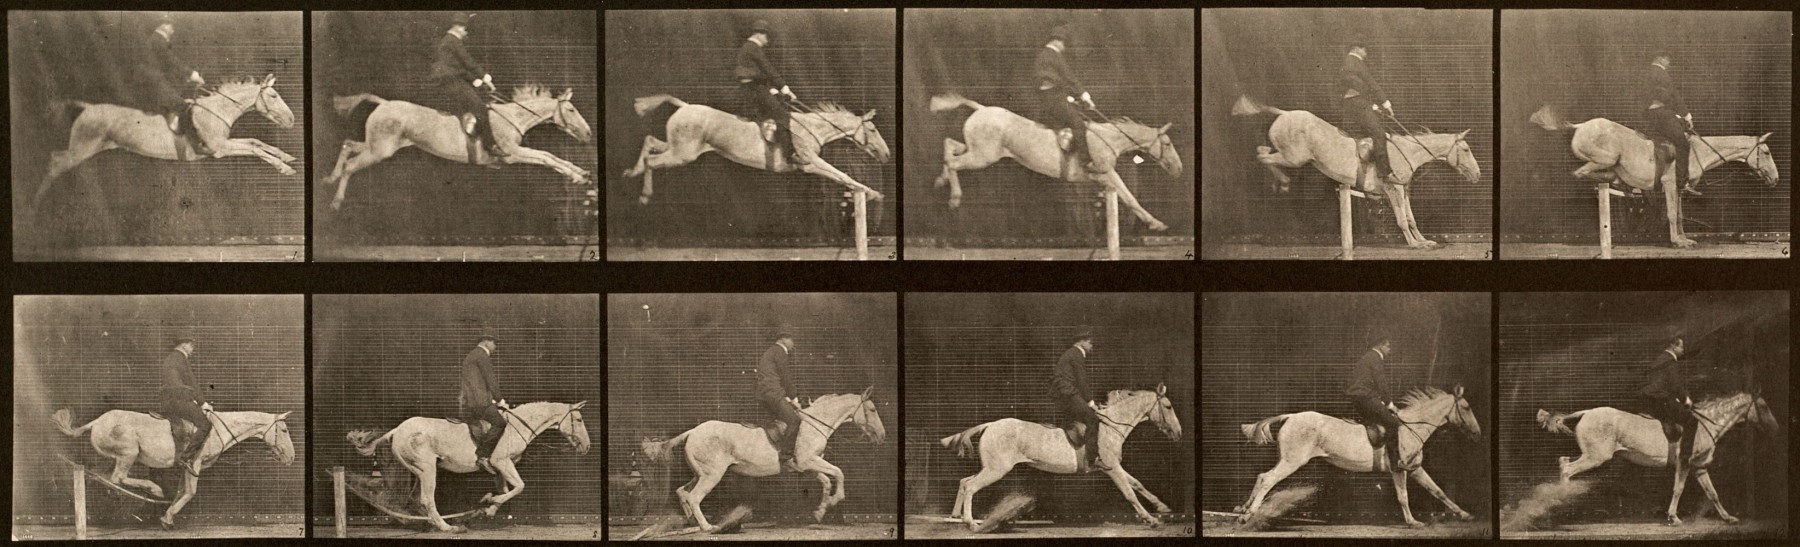 Sequence of black and white photos showing the movements of a horse and rider jumping a hurdle and knocking it over